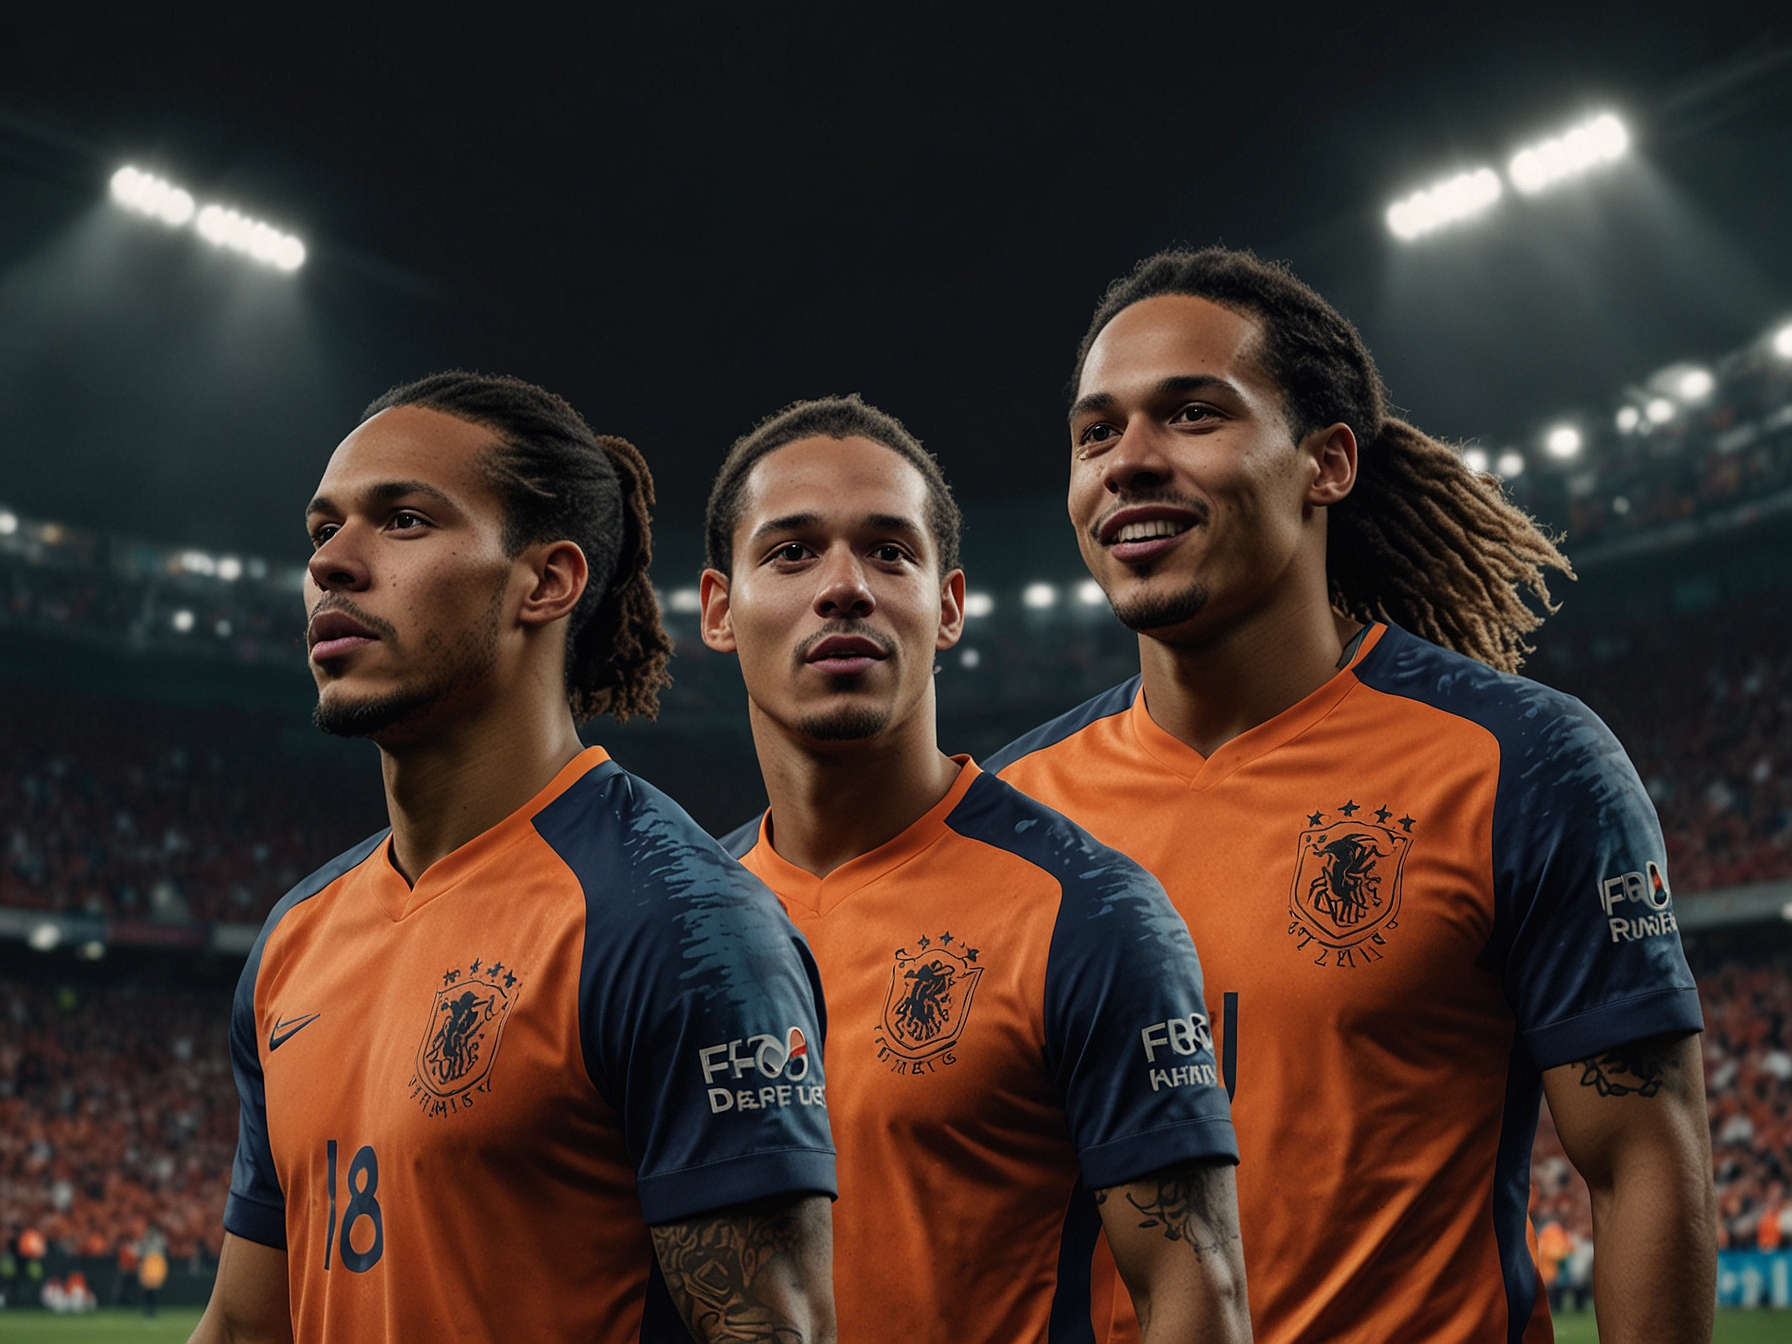 Key players of the Netherlands, including Virgil van Dijk, Memphis Depay, and Xavi Simons, engage in a strategic friendly match against TSV Havelse to prepare for upcoming challenges in EURO 2024.